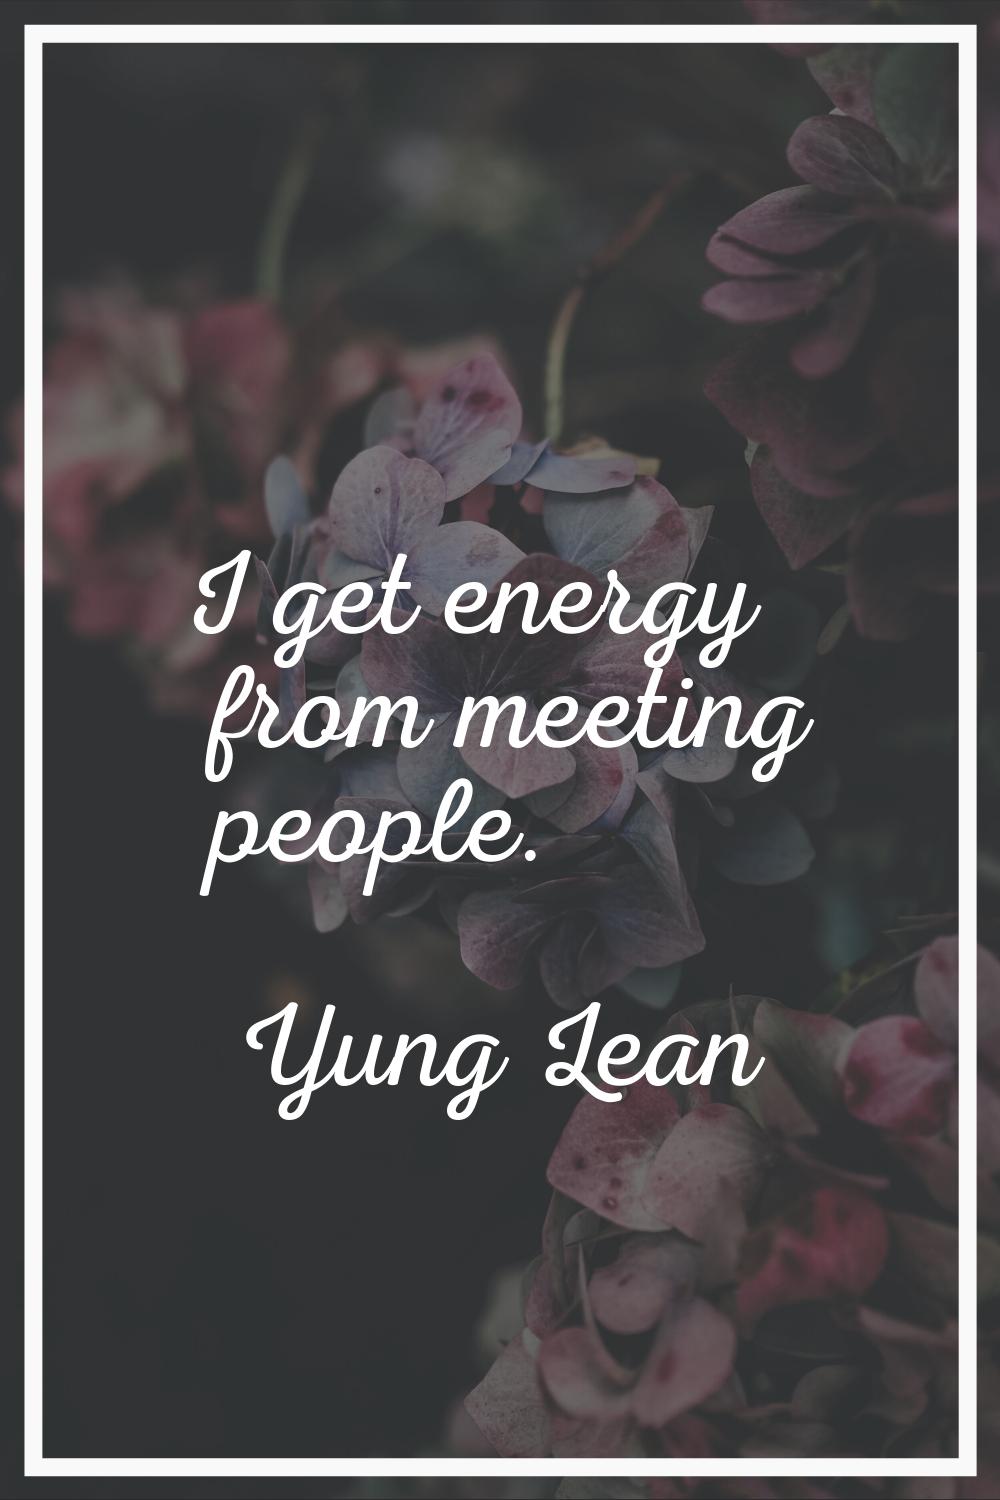 I get energy from meeting people.